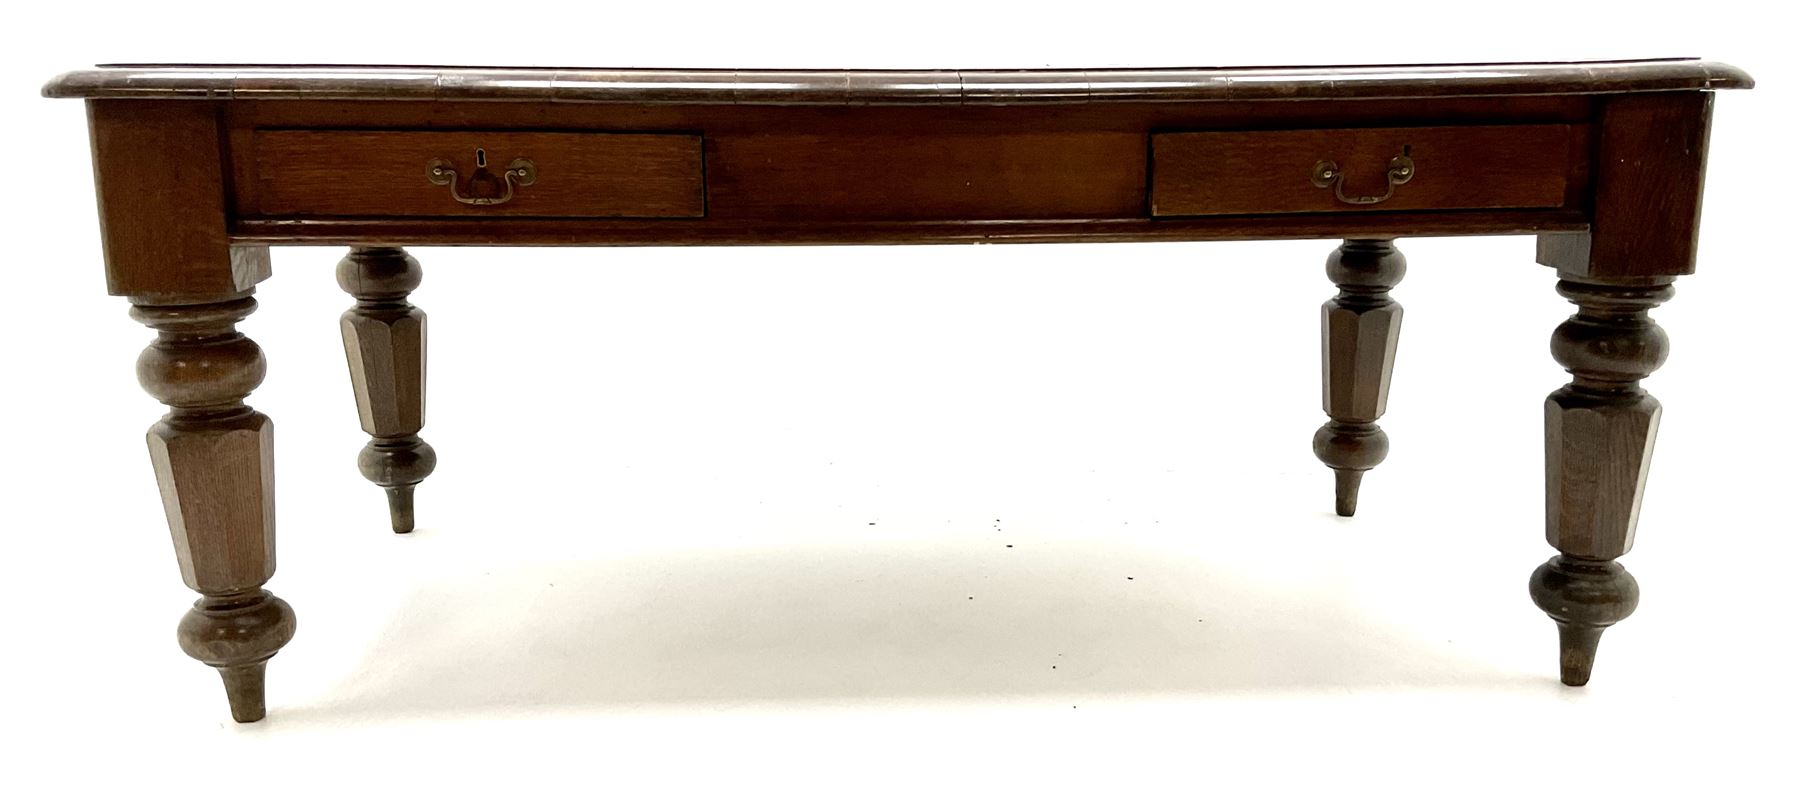 Victorian oak library table - Image 2 of 5